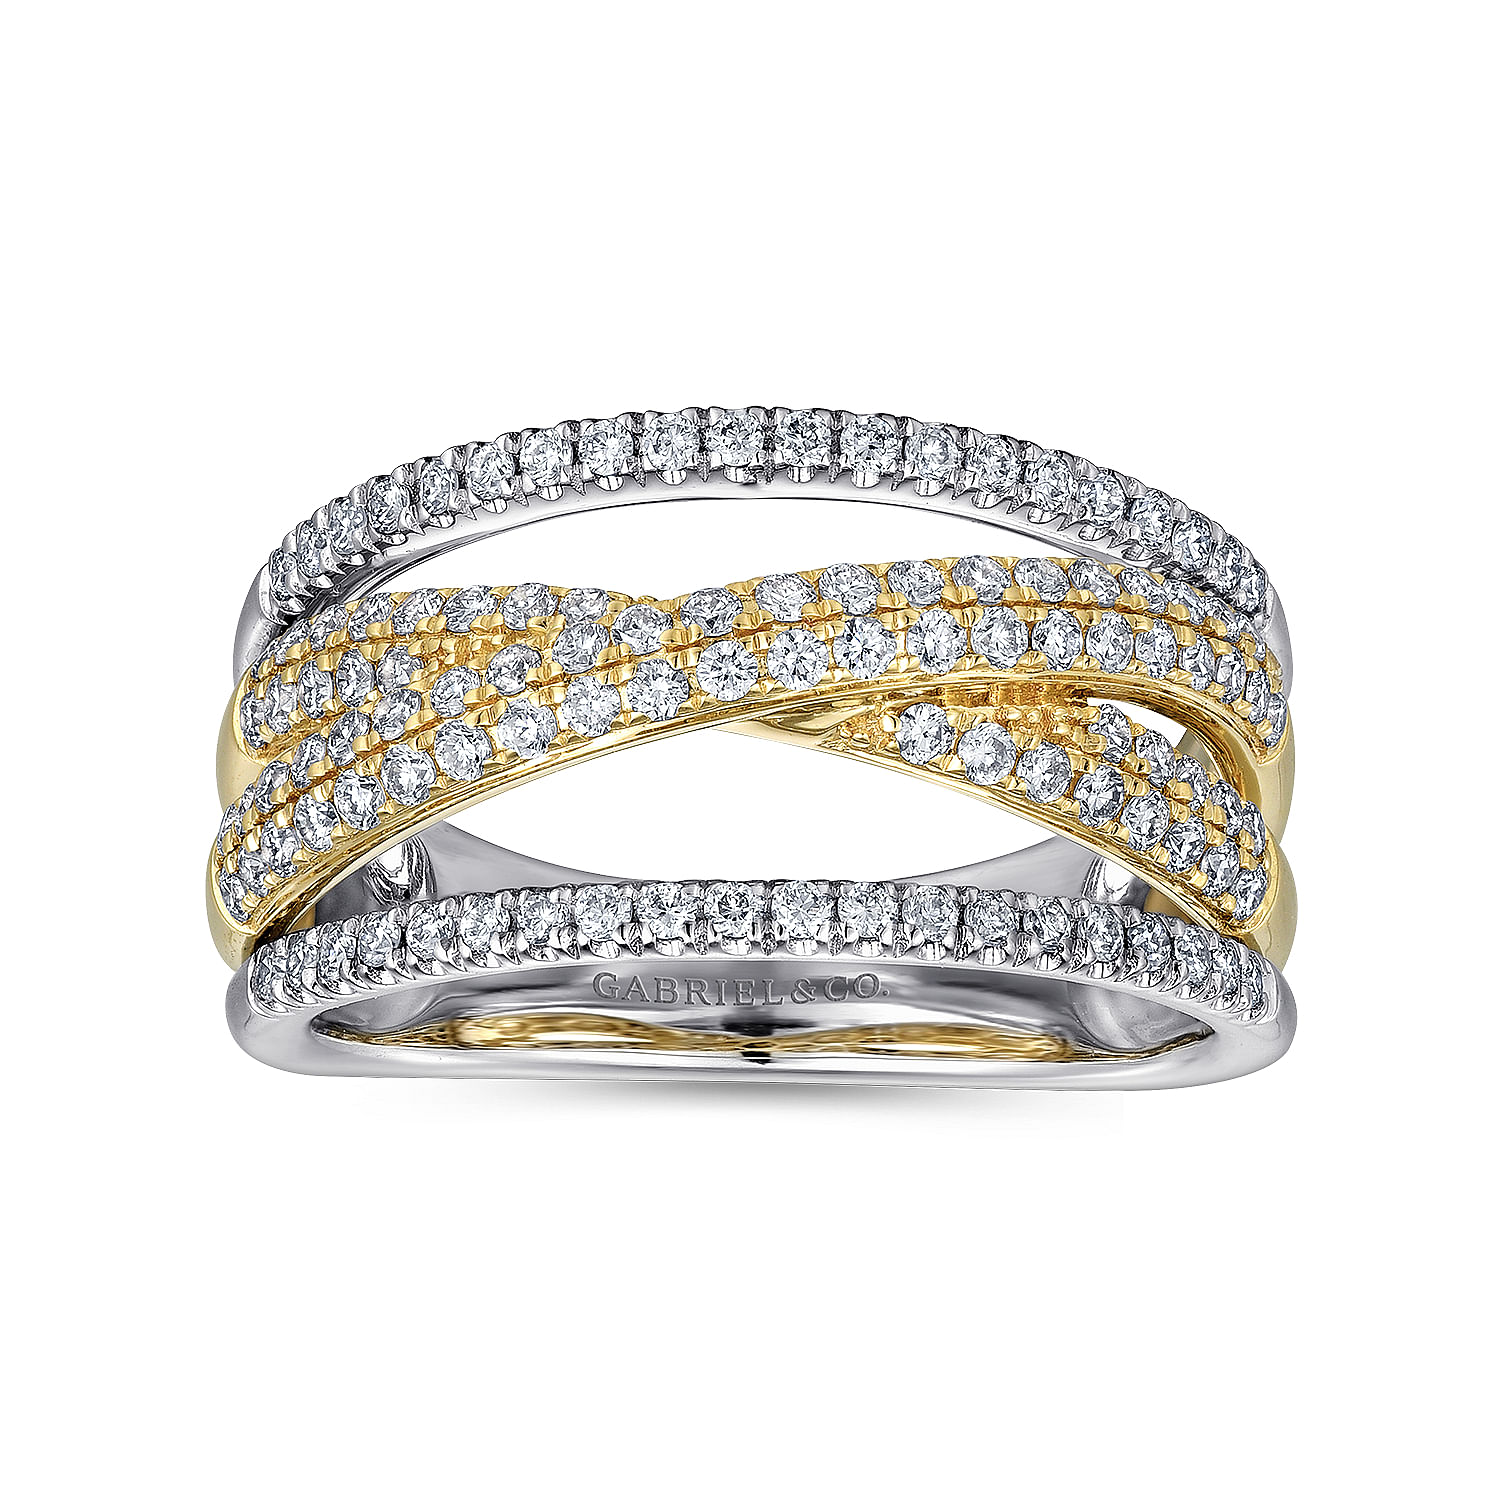 14K Yellow and White Gold Criss Crossing Multi Row Diamond Ring